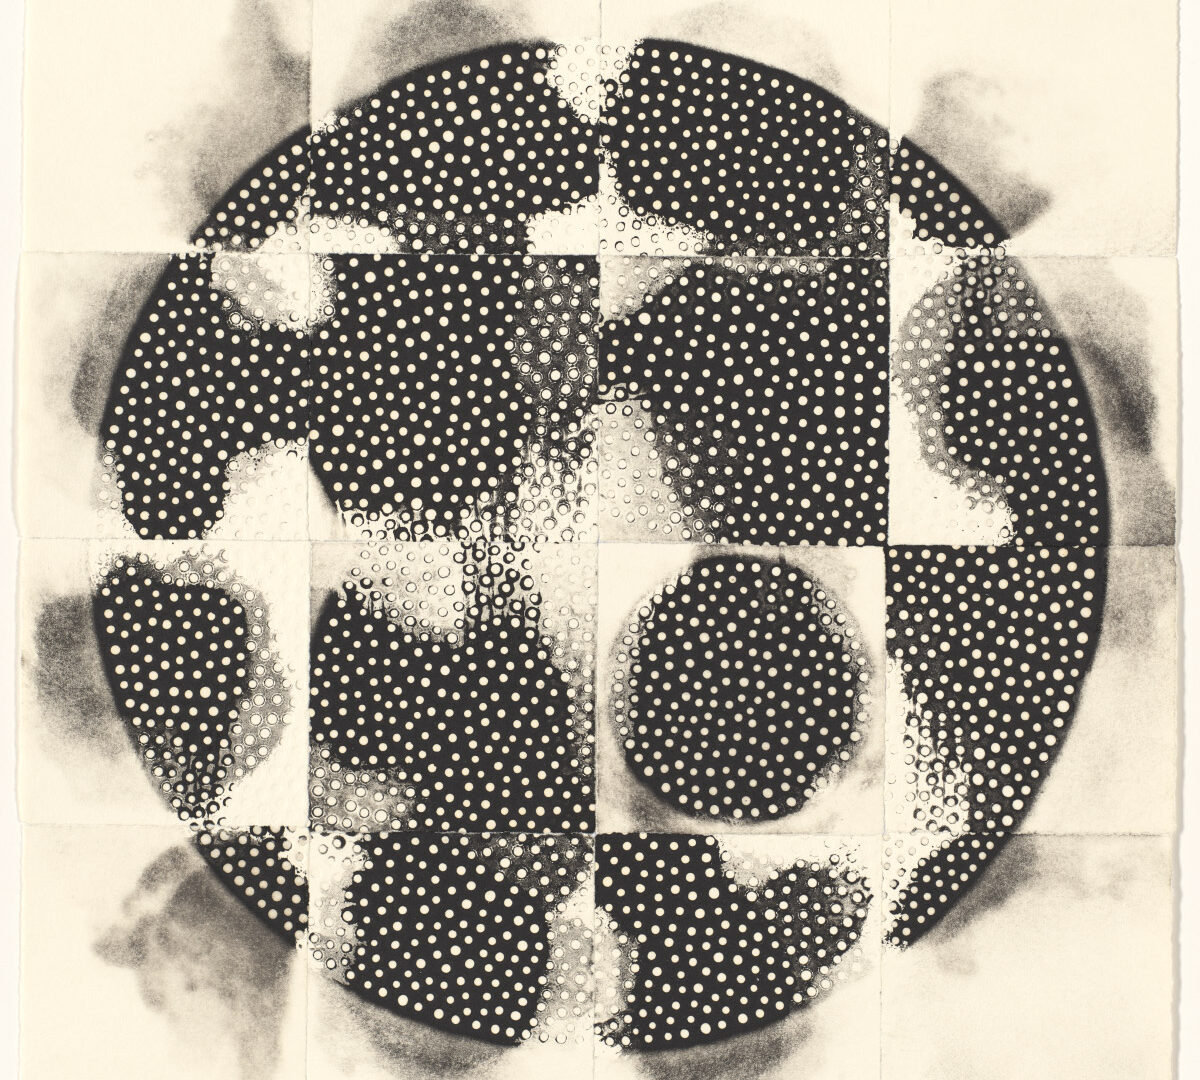 This black and white monoprint is composed of a series of 16 separate 3-inch squares assembled in four rows of four squares each with the white background forming a border around the whole assemblage. In a mosaic-like arrangement, the 16 white squares make up one larger square that forms a central image of a circle. Smoky greyish black shadows emanate from each edge of the circle. Most of the individual squares making up the circle are printed with black shapes that almost resemble jigsaw pieces. On the near bottom right side, a full circle appears in one of the squares, in contrast to the jagged forms in the other squares. The black forms are broken up with tiny white polka dots. While some dots appear flat against the dark background, other dots appear as if embossed with raised edges.